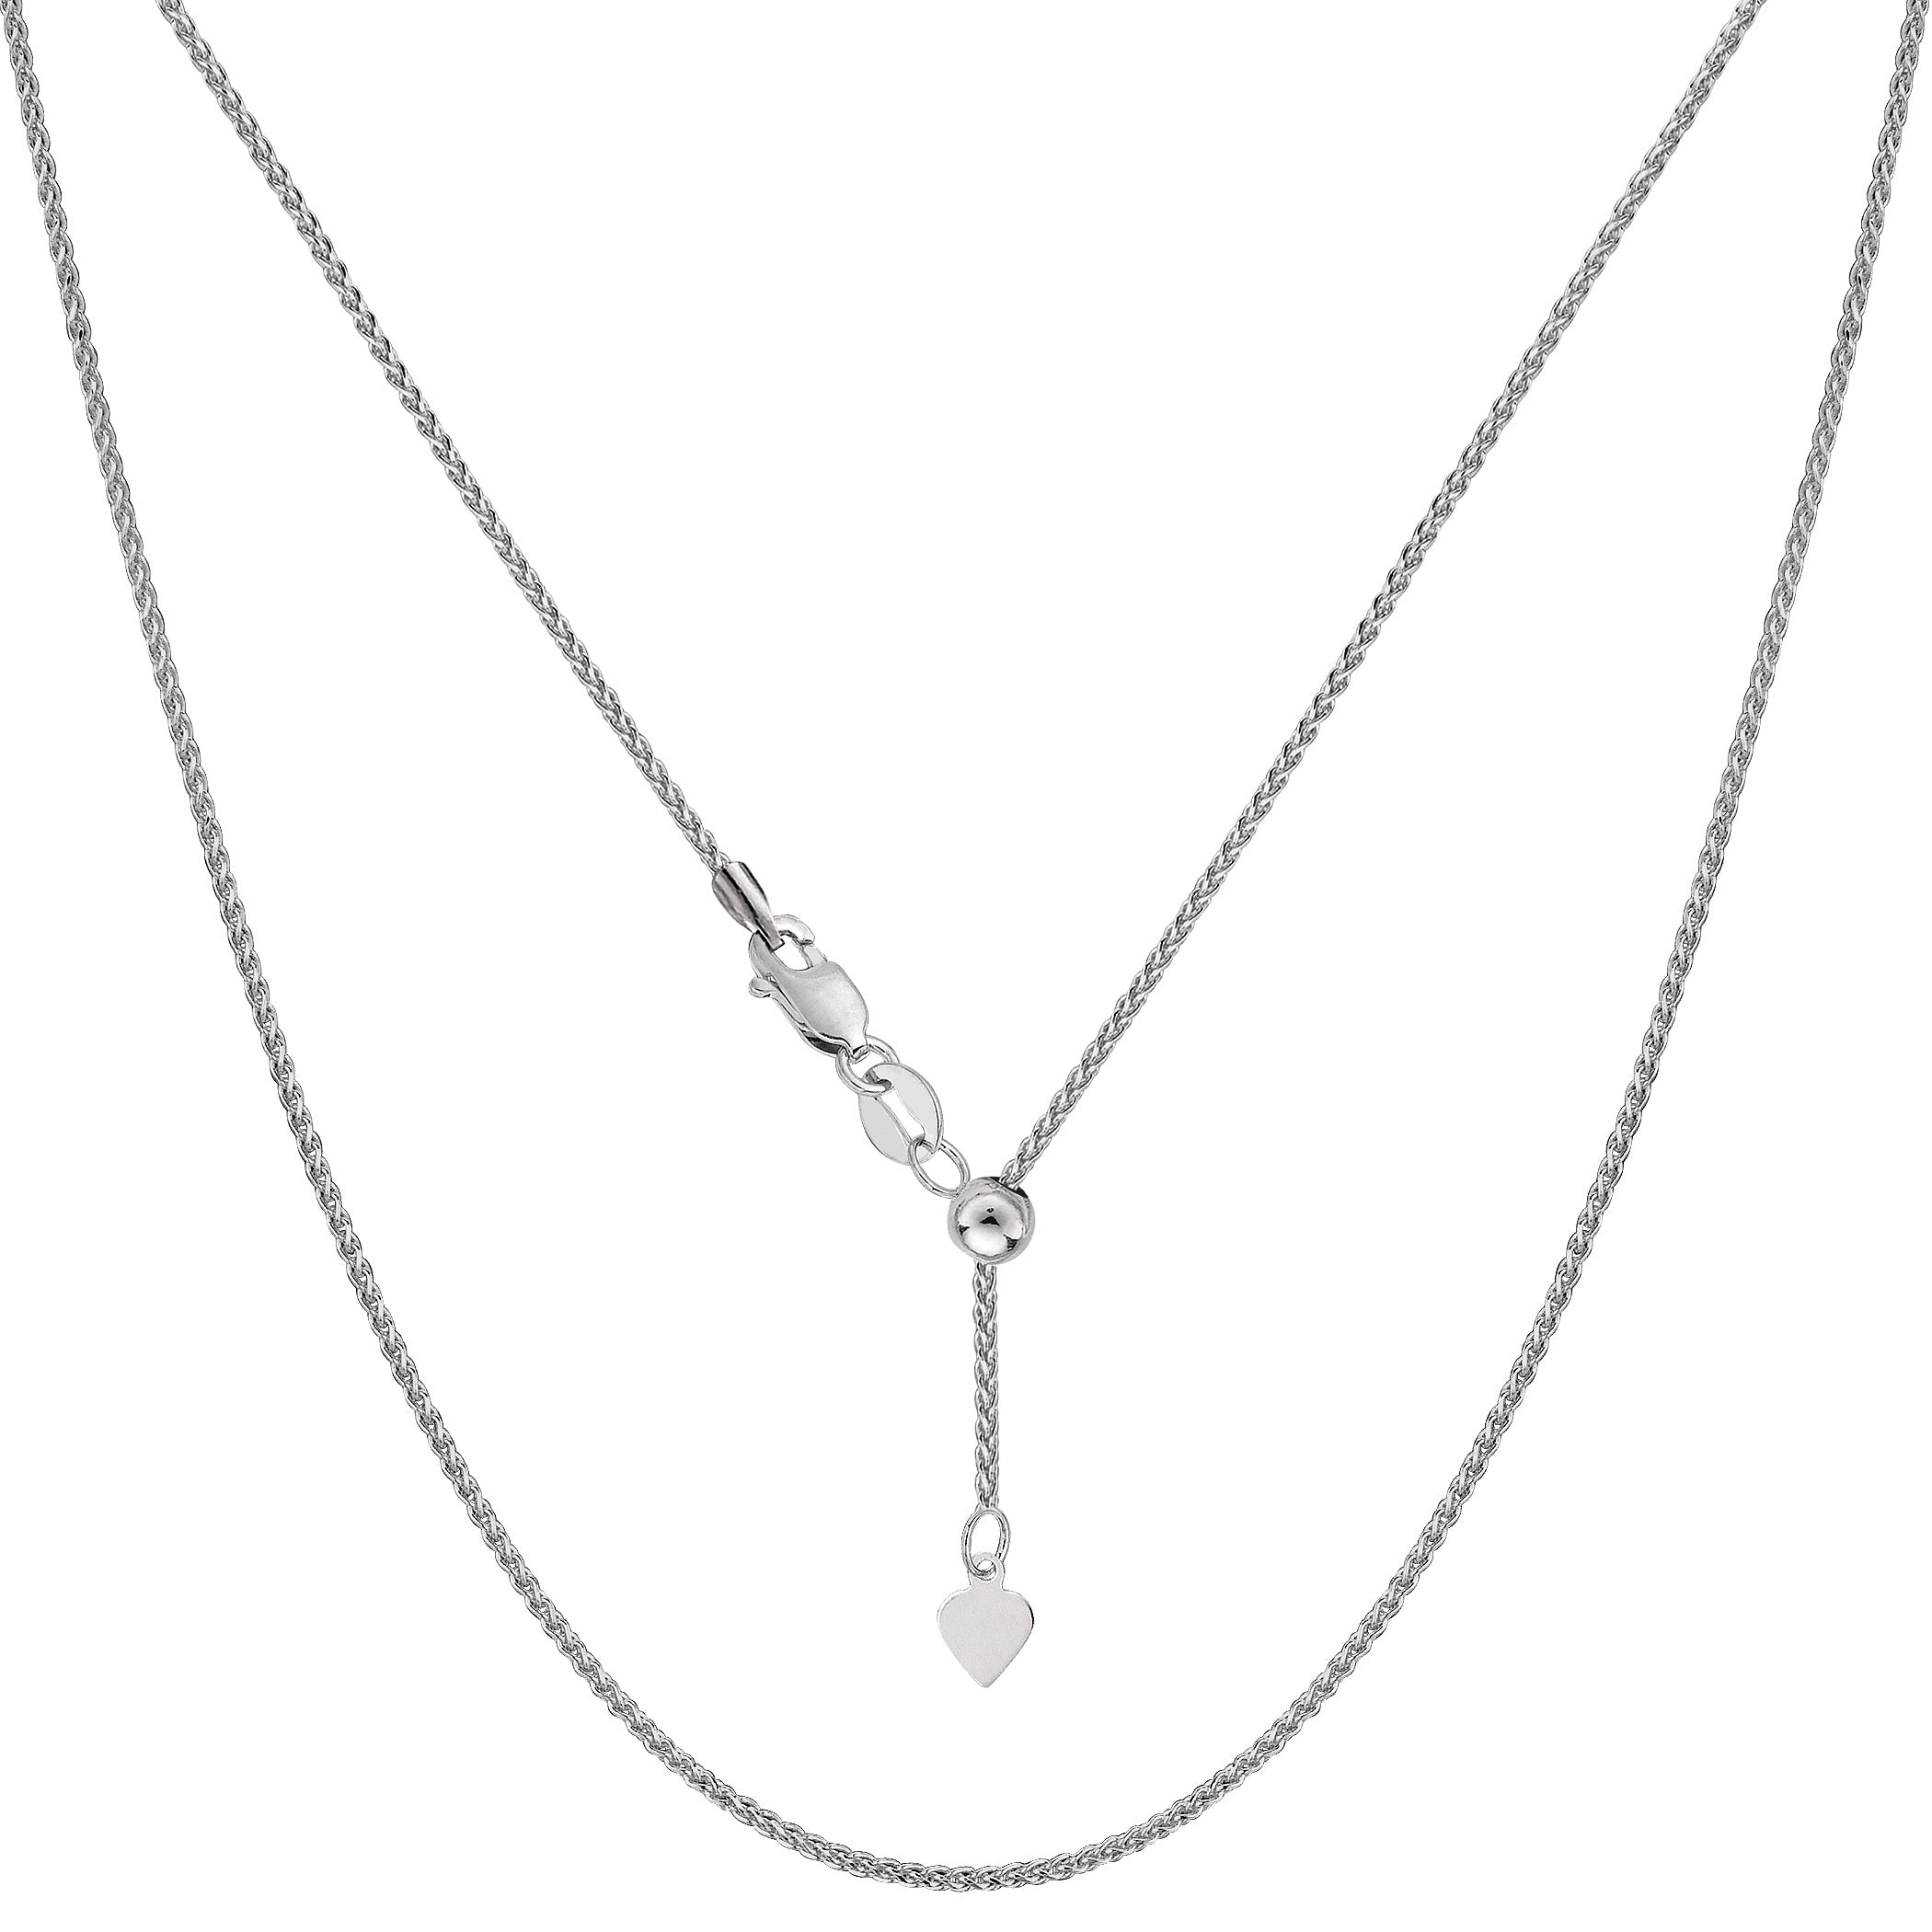 Sterling Silver Rhodium Plated Adjustable Wheat Chain Necklace, 1.0mm, 22" fine designer jewelry for men and women